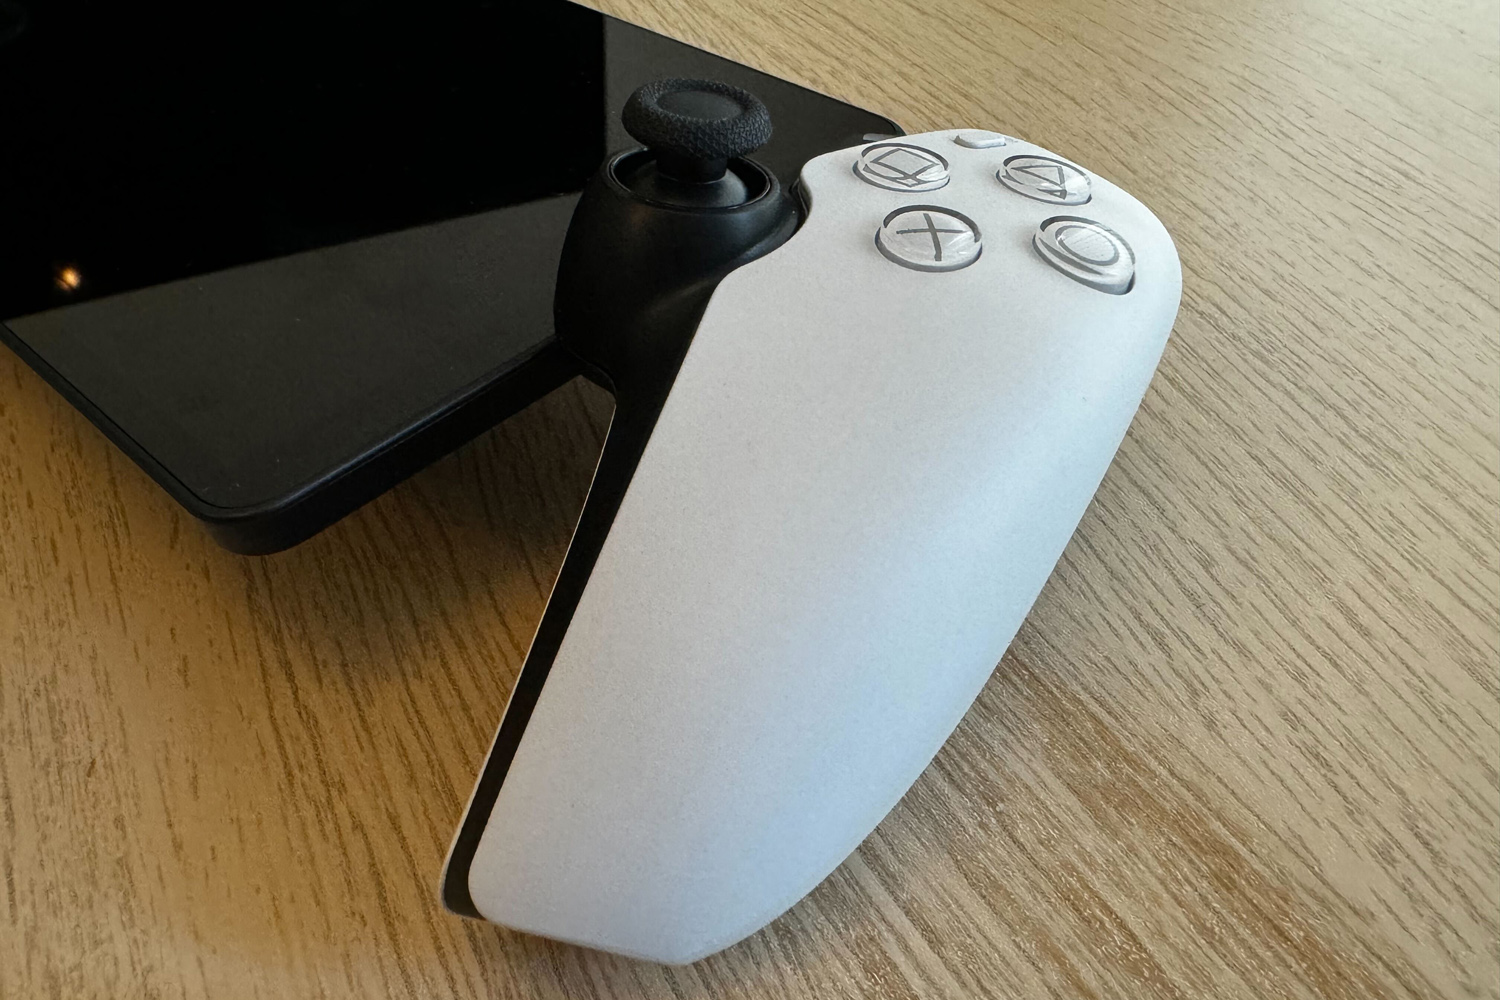 Sony PlayStation Portal review analogue stick